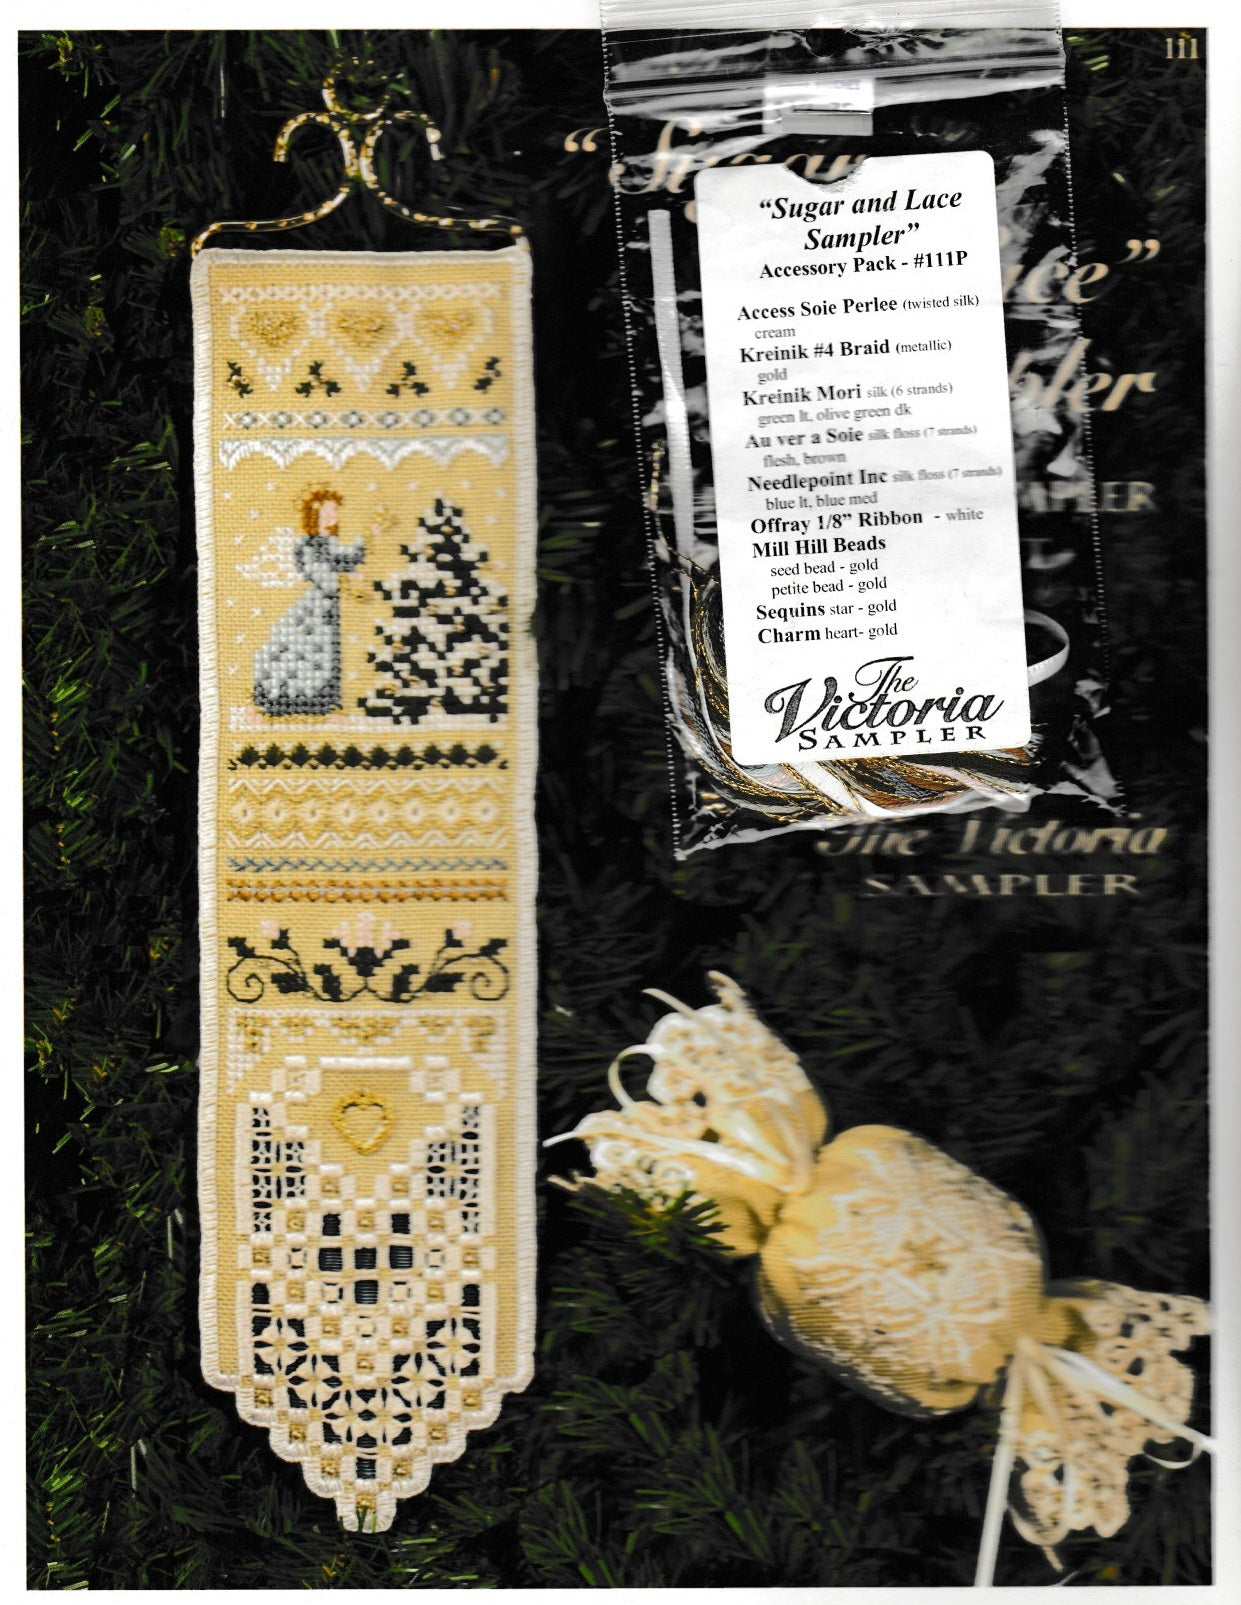 Victoria Sampler Sugar and Lace Sampler 111 christmas cross stitch pattern